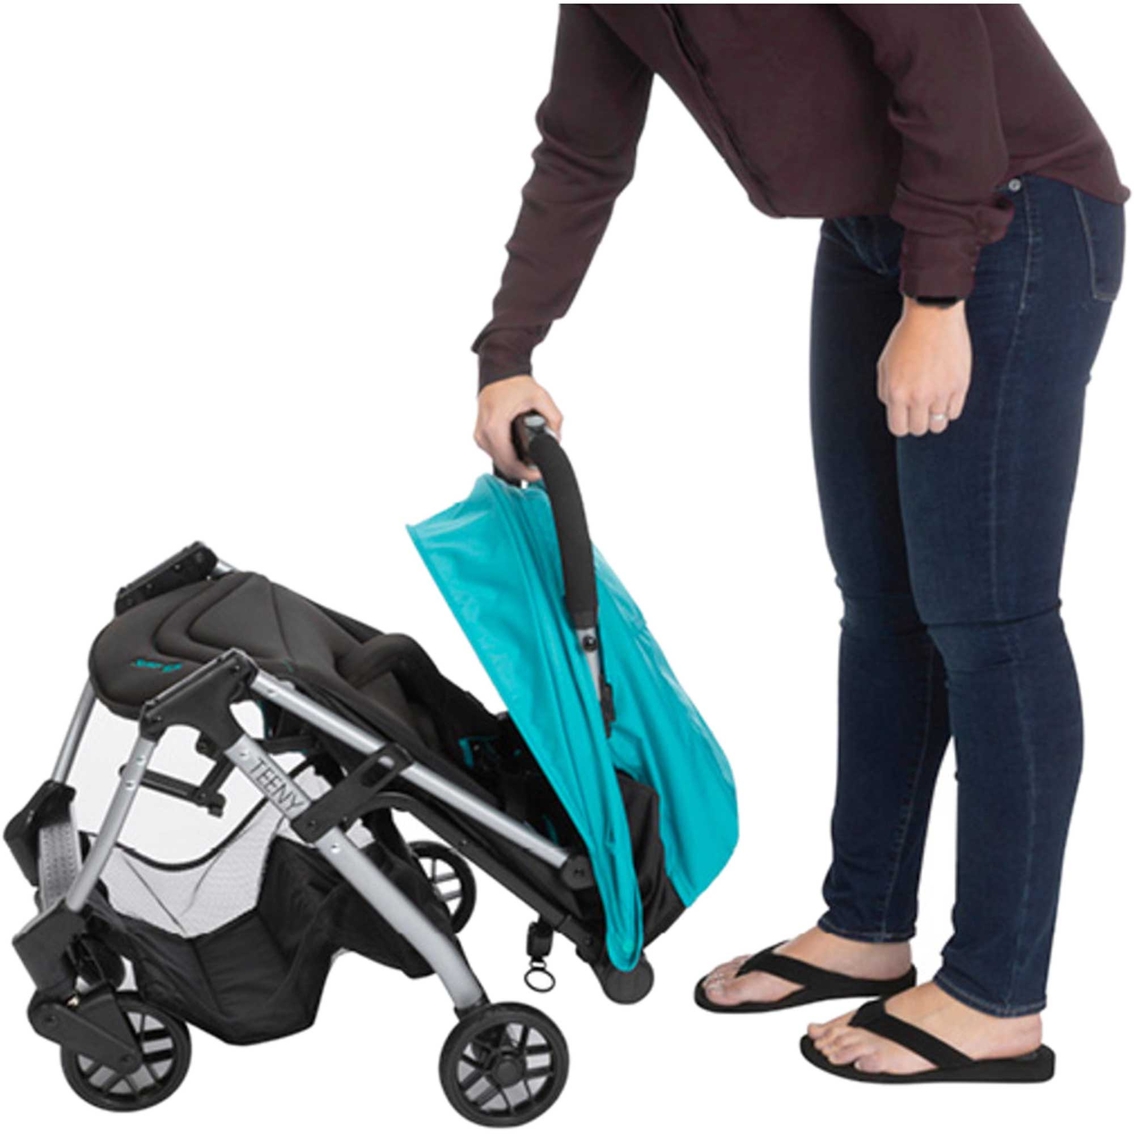 Safety 1st Teeny Ultra Compact Stroller - Image 5 of 8